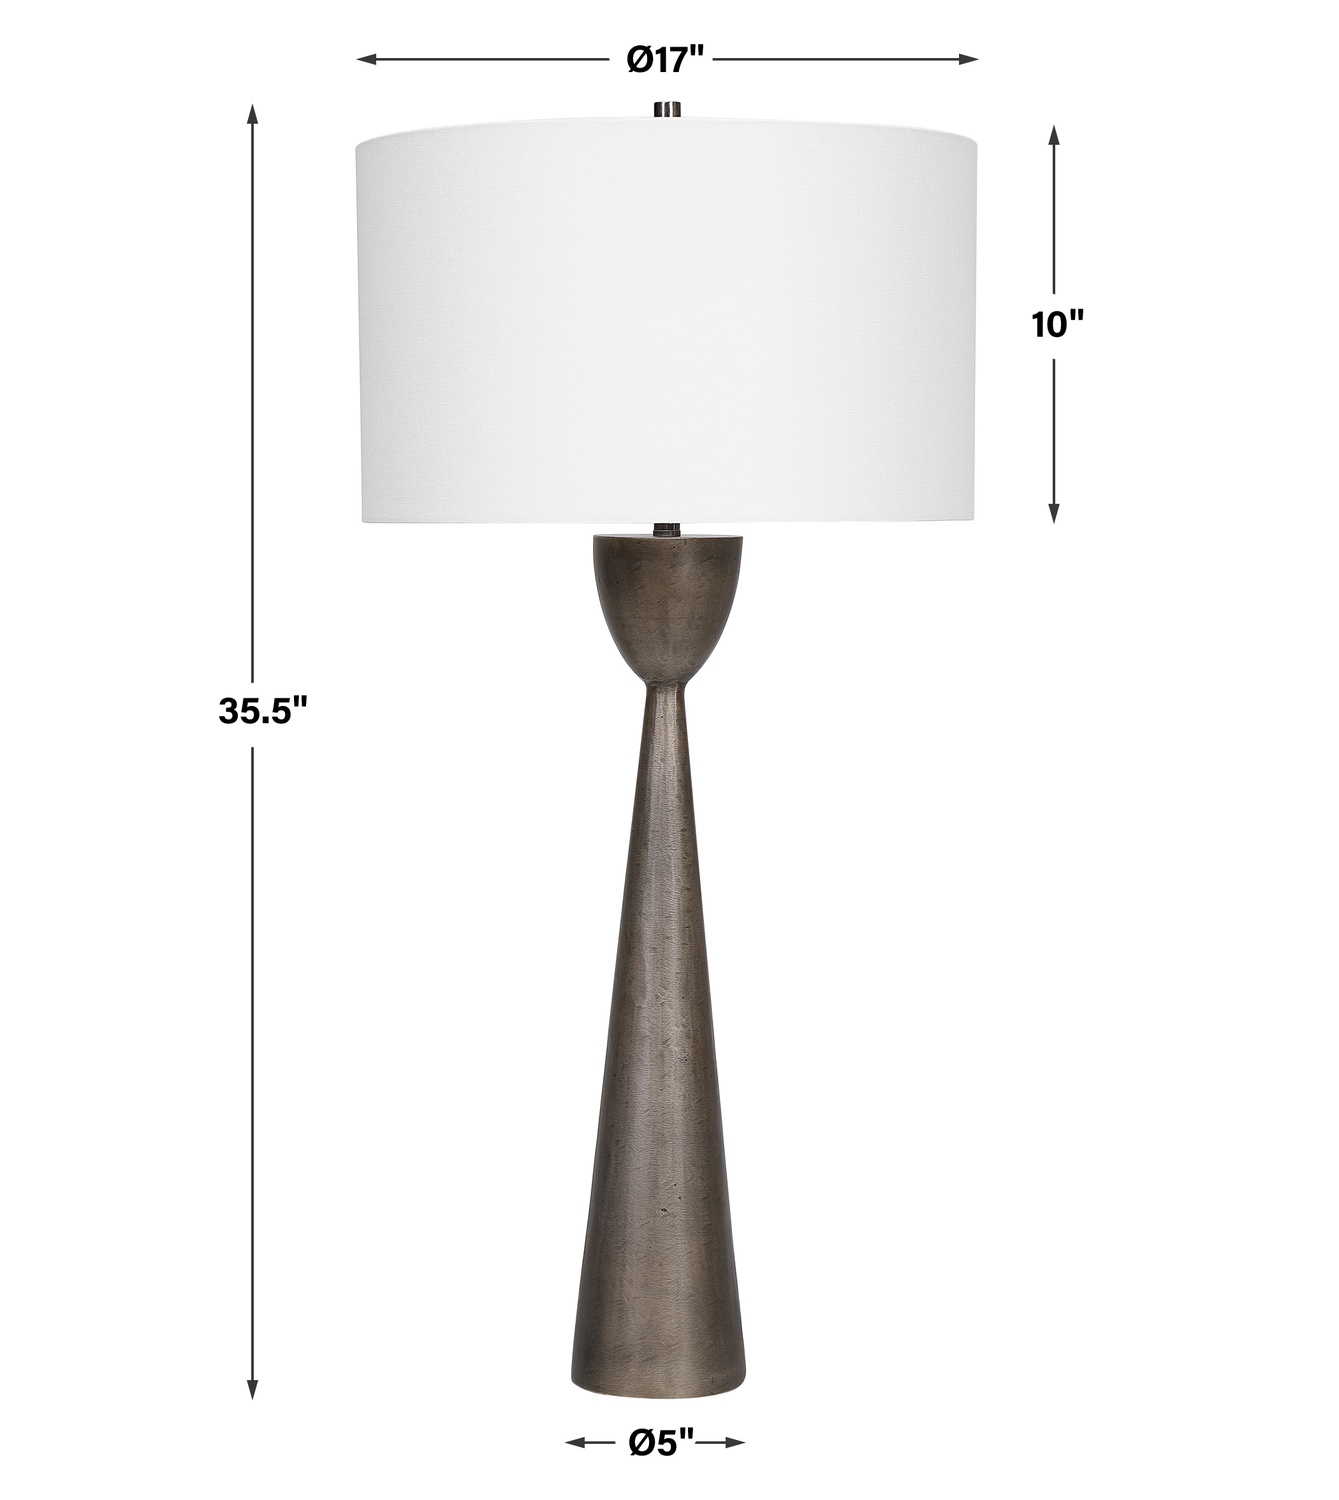 Waller-Handcrafted Cast Table Lamp